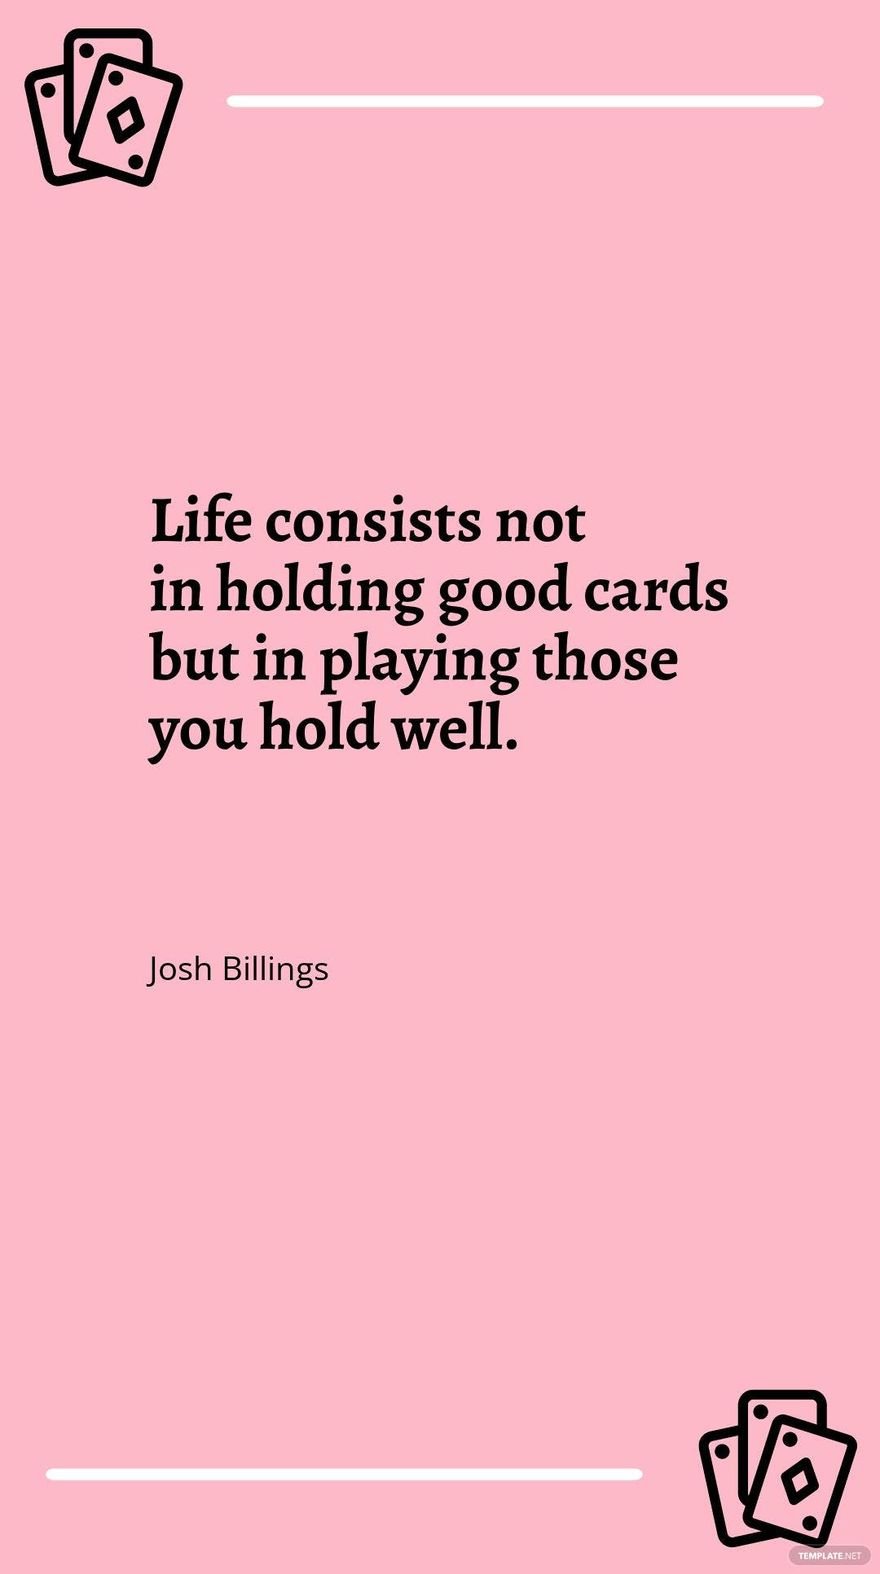 Josh Billings - "Life consists not in holding good cards but in playing those you hold well."